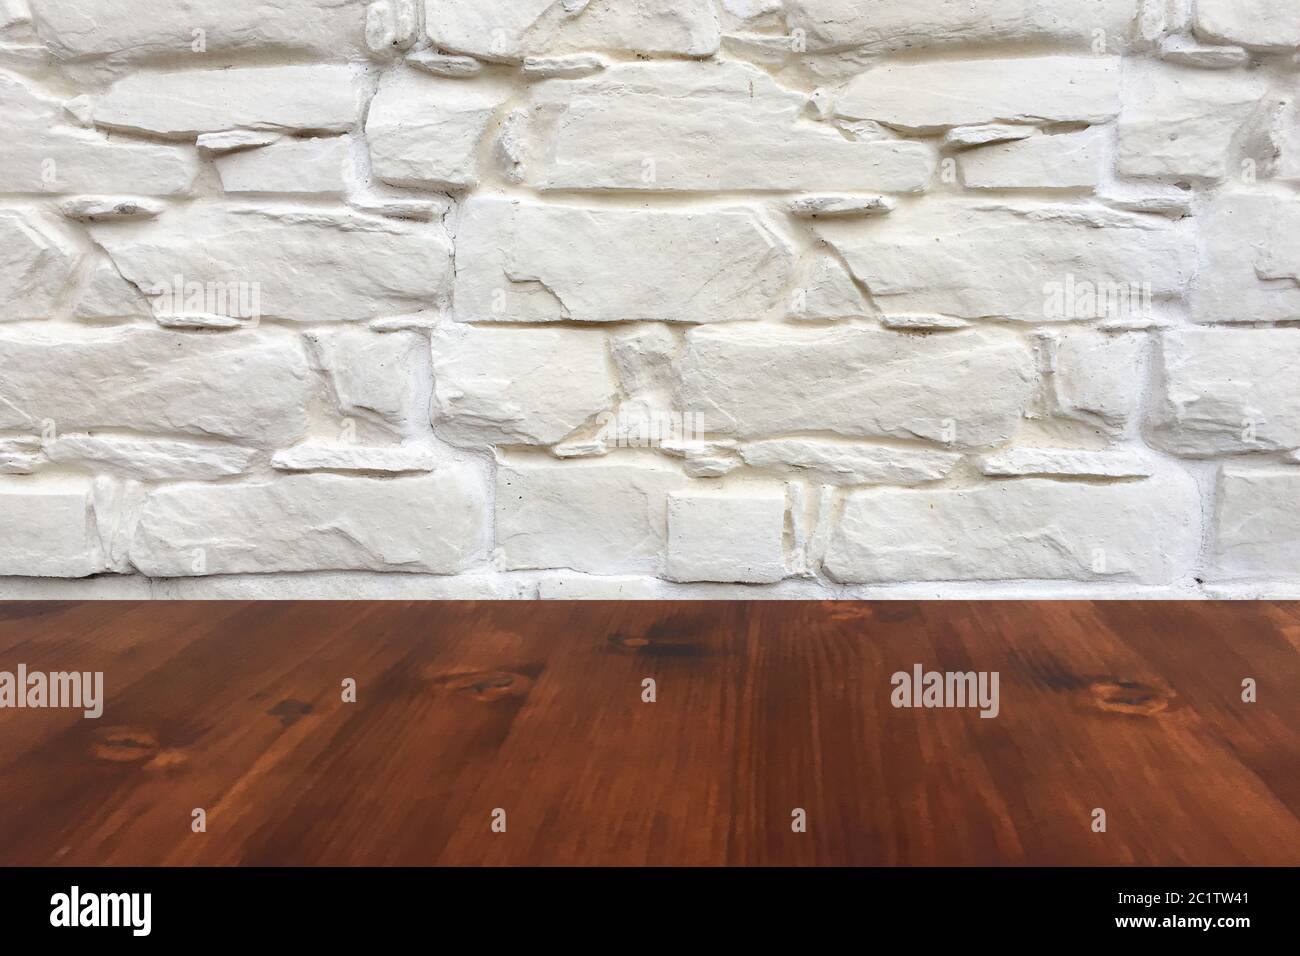 old brown oak wooden table on the blurry white wash wall background, wood table. Stock Photo